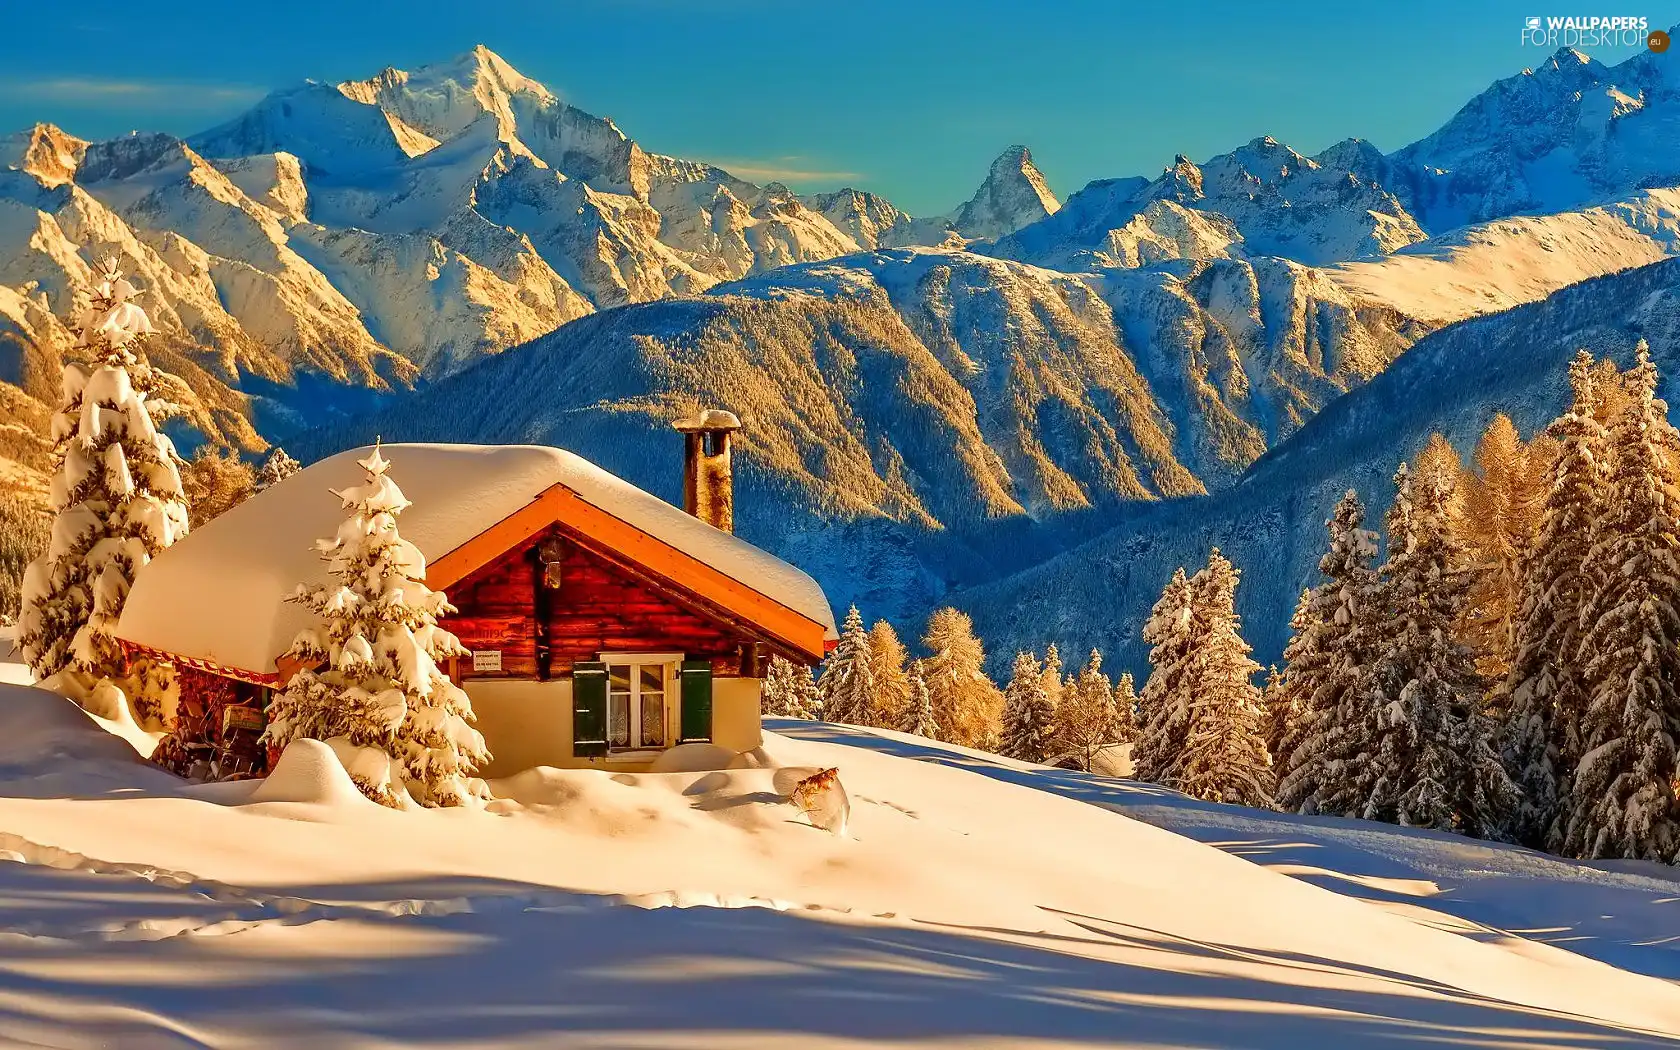 winter, woods, Home, Mountains